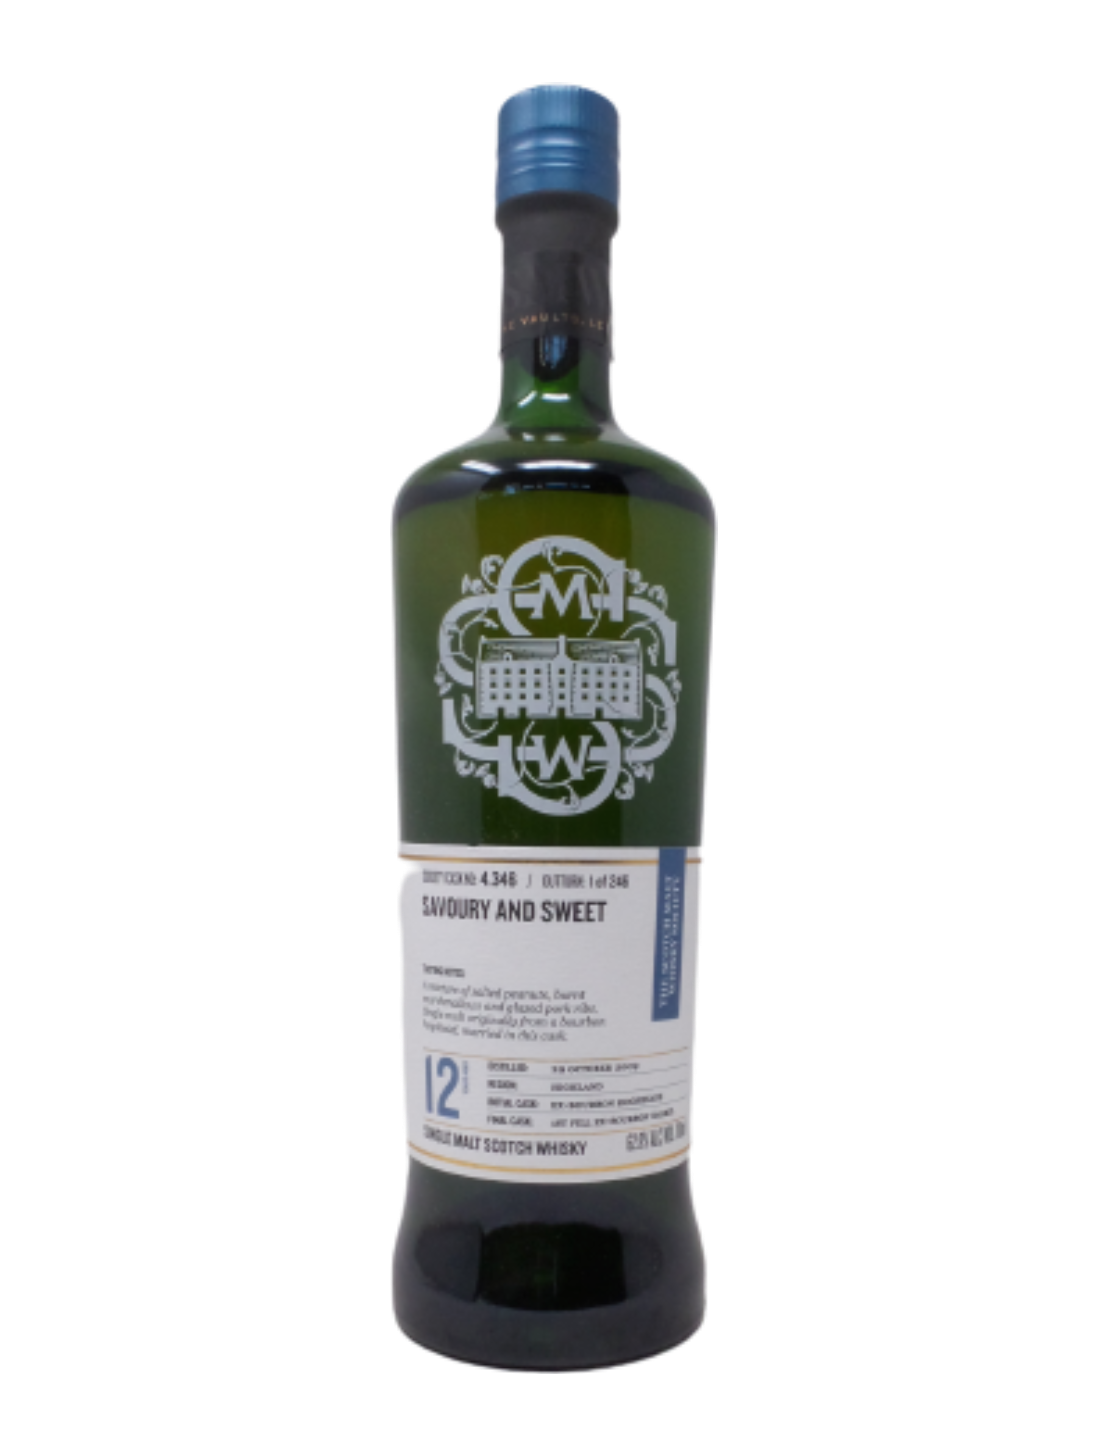 An elegant bottle of The Scotch Malt Whisky Society Cask No. 4.346 in front of a plain white background